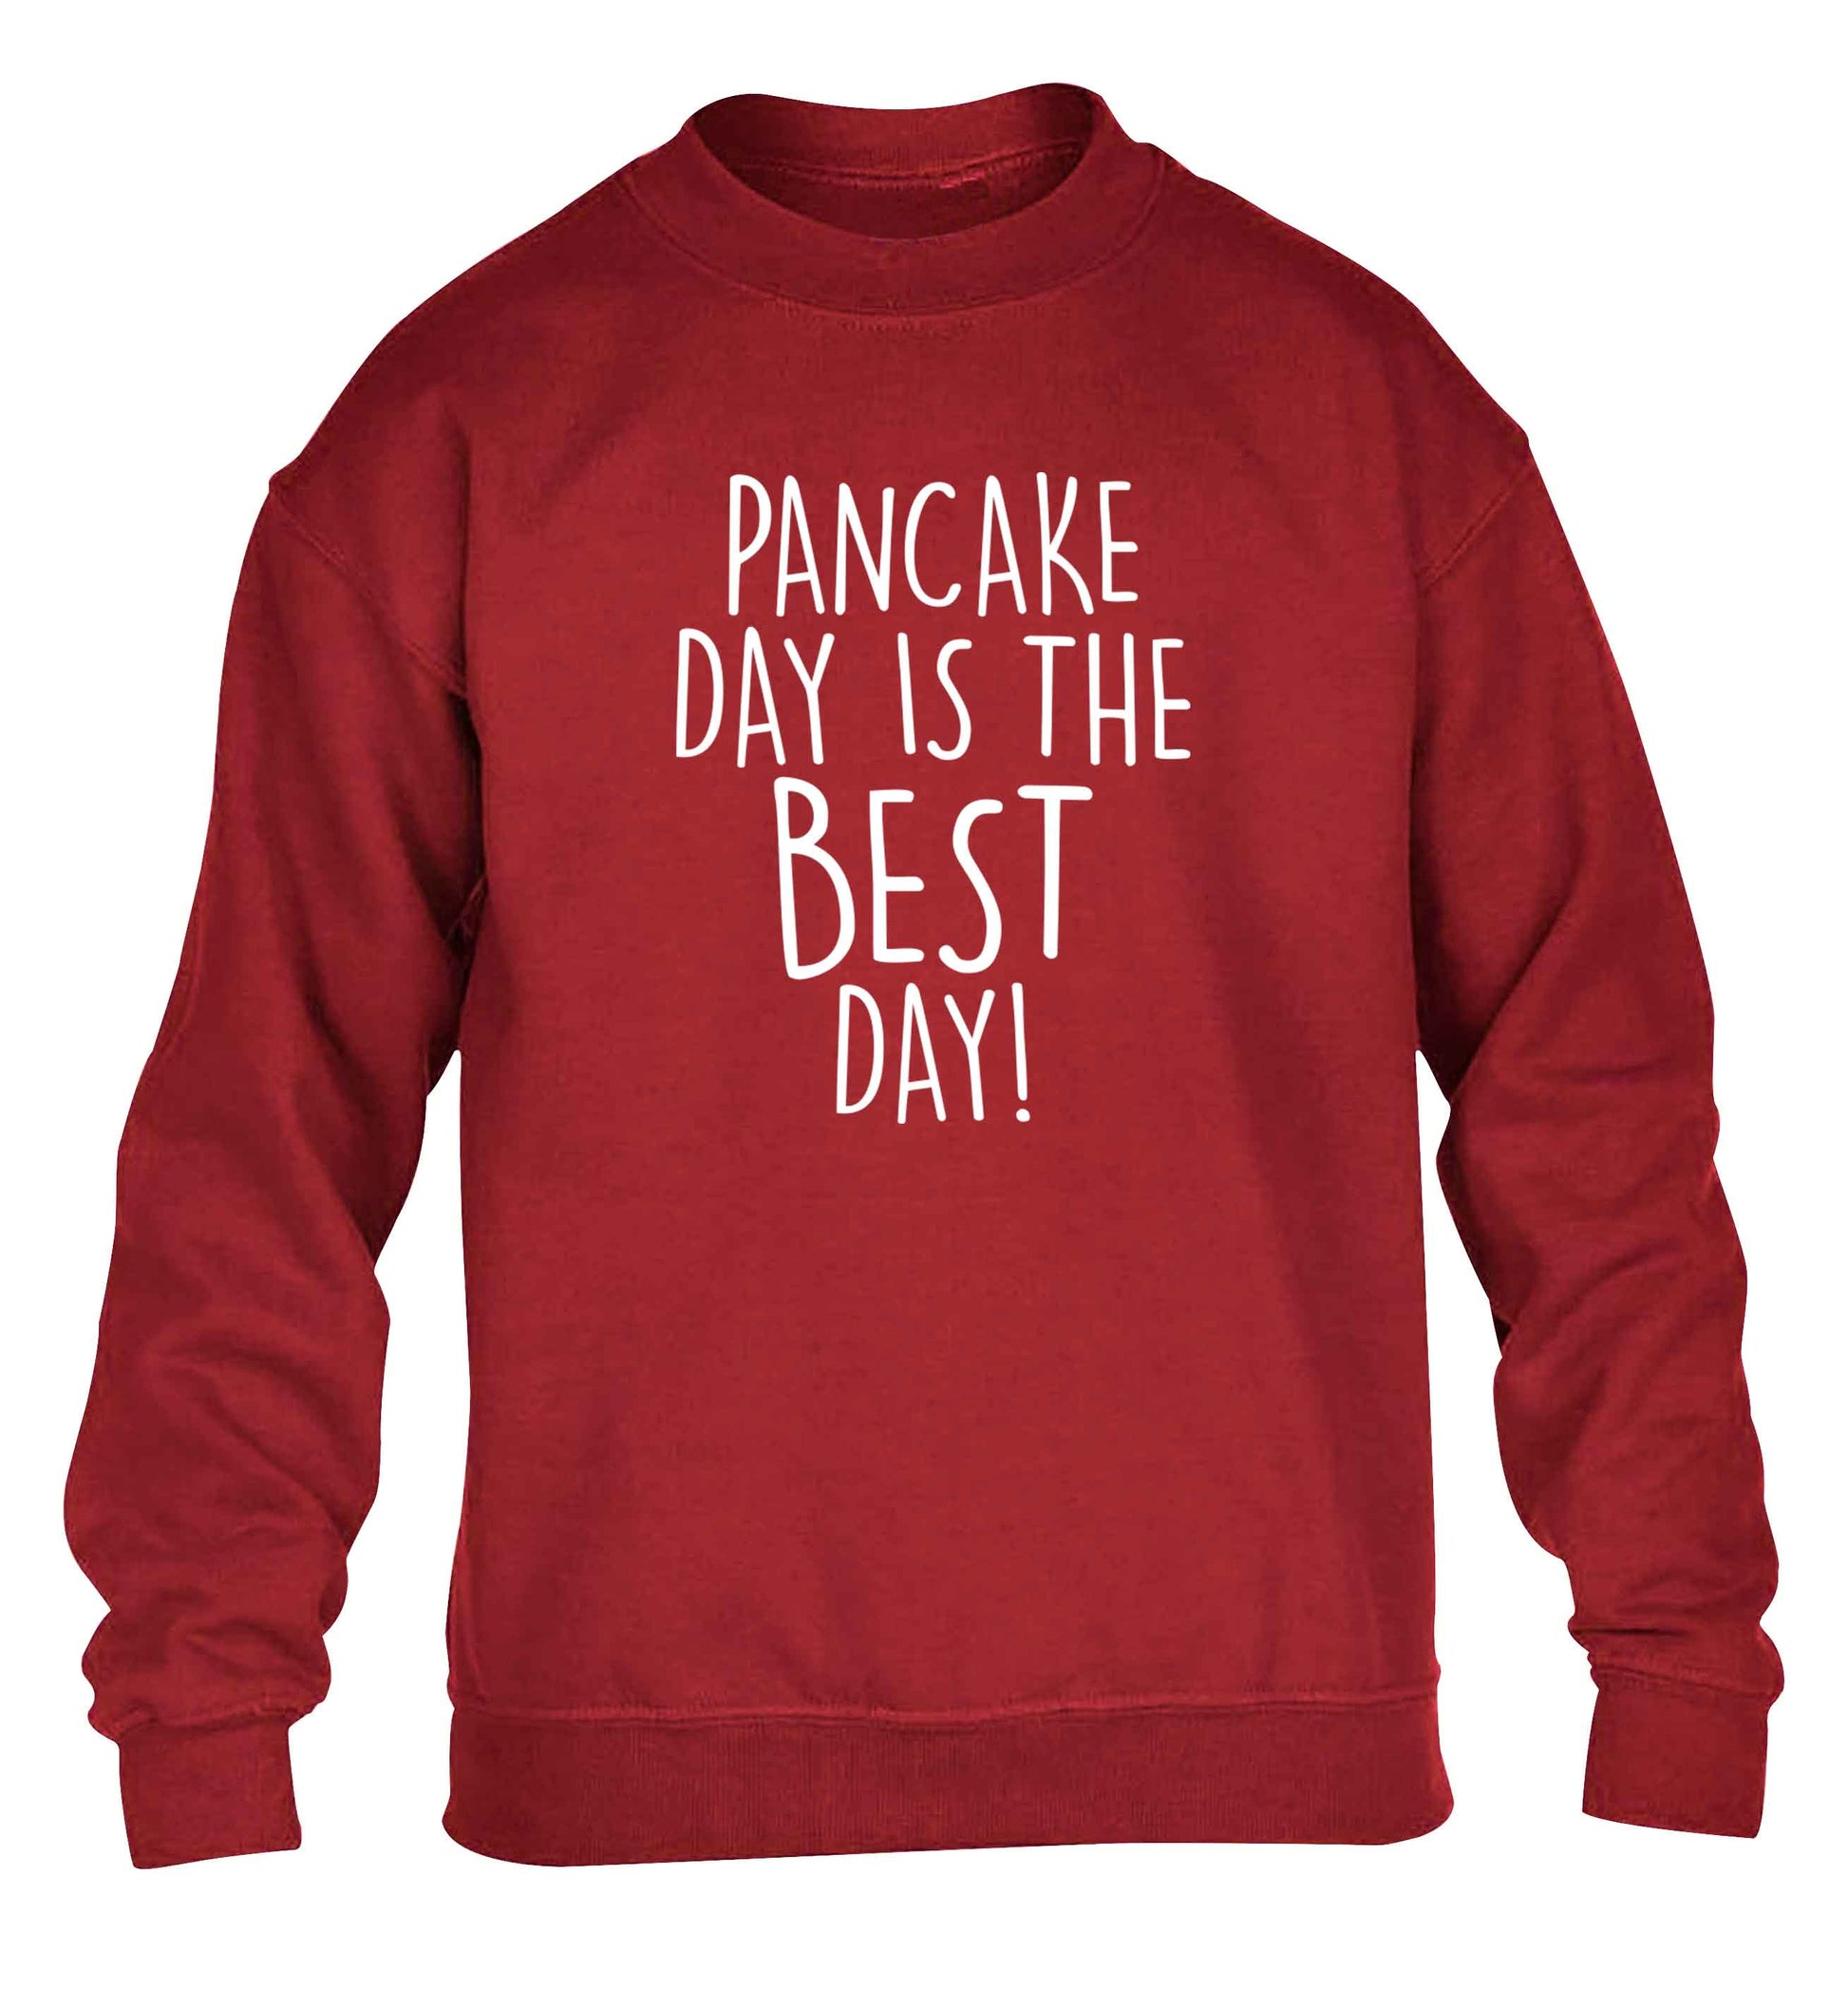 Pancake day is the best day children's grey sweater 12-13 Years